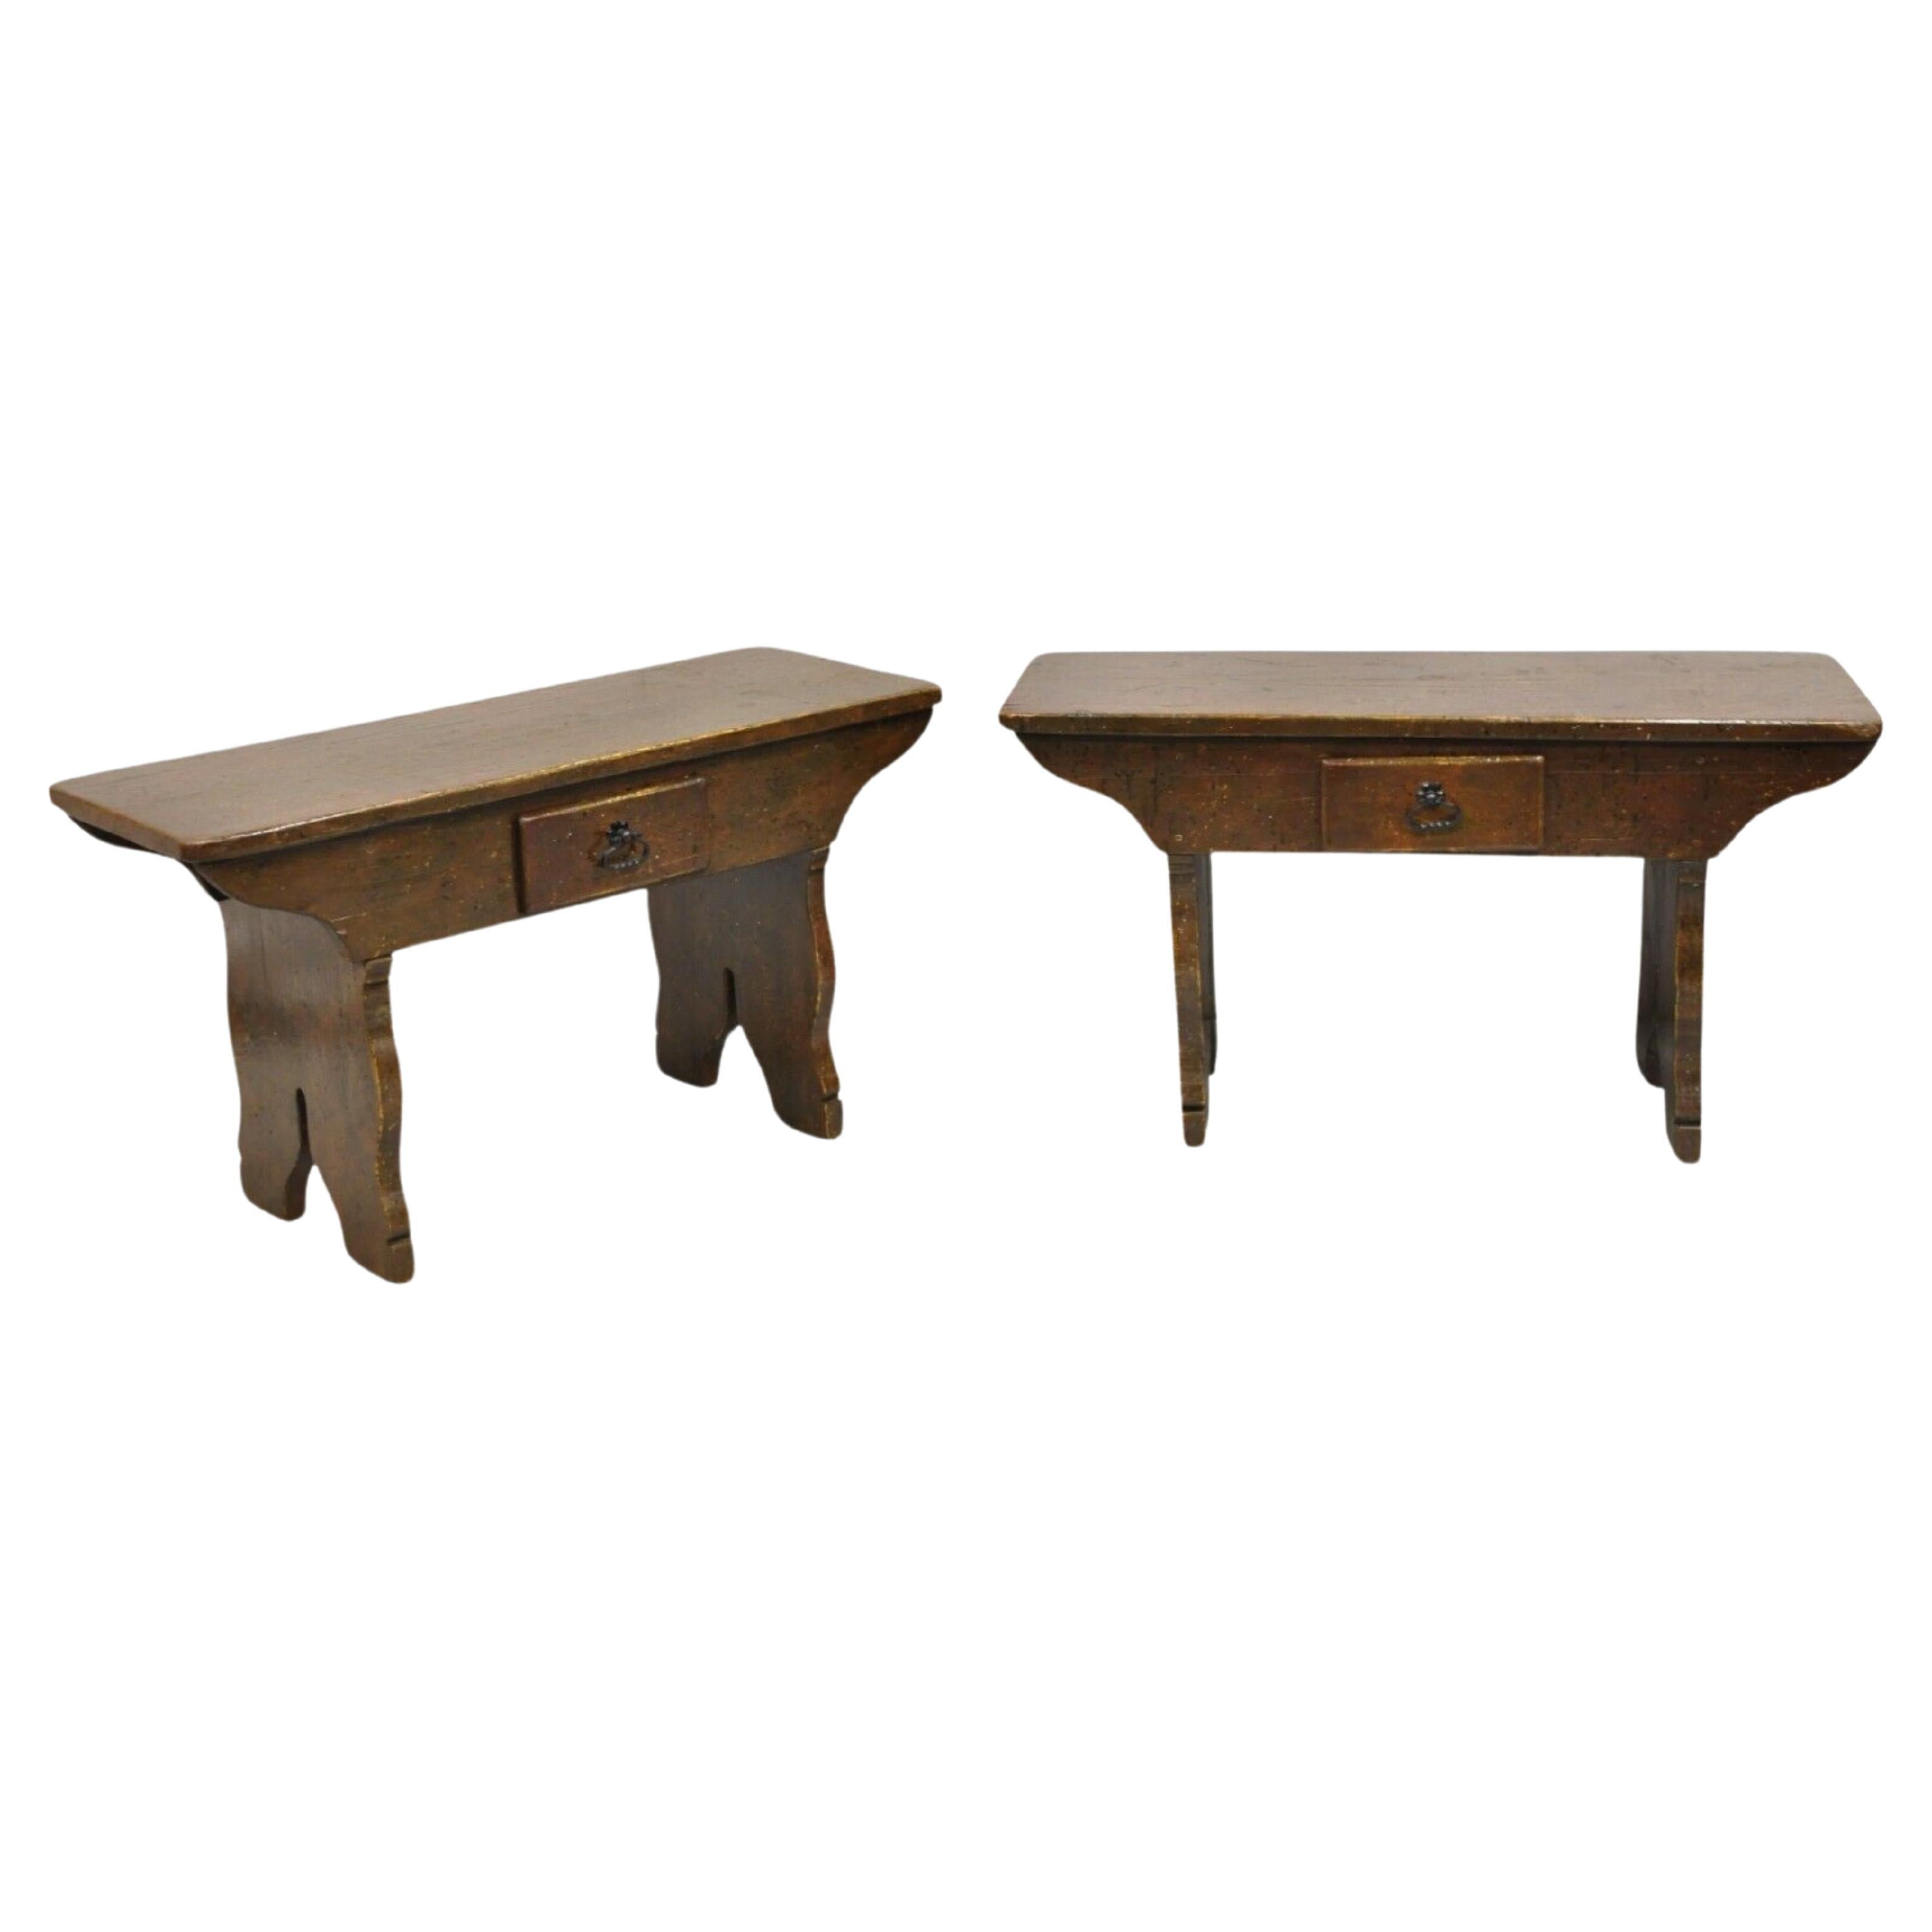 Antique French Country Farmhouse Pine Wood Low Side Table Bench w/ Drawer - Pair For Sale